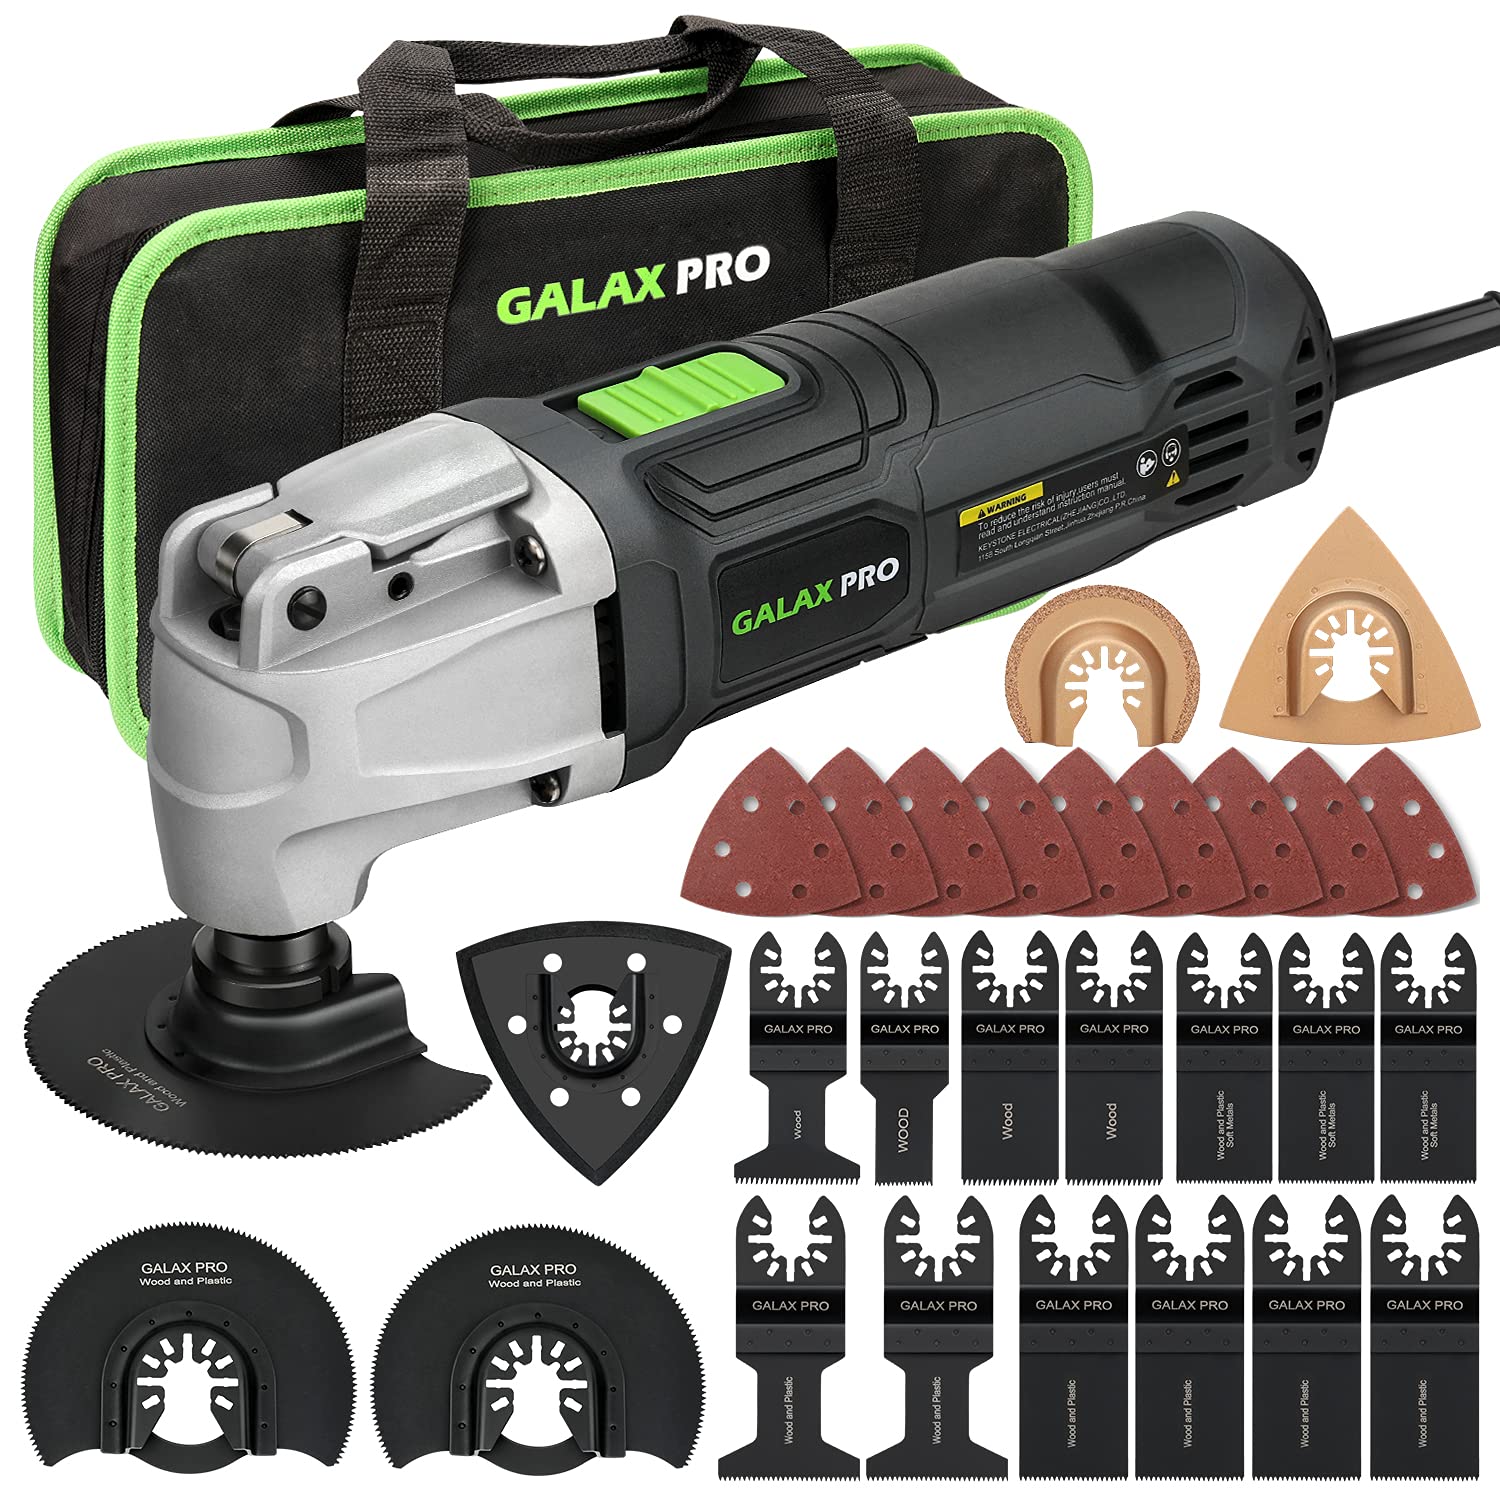 GALAX PRO 2.4Amp 6 Variable Speed Oscillating Multi-Tool Kit with Quick-Lock accessory change Oscillating Angle3 28pcs A